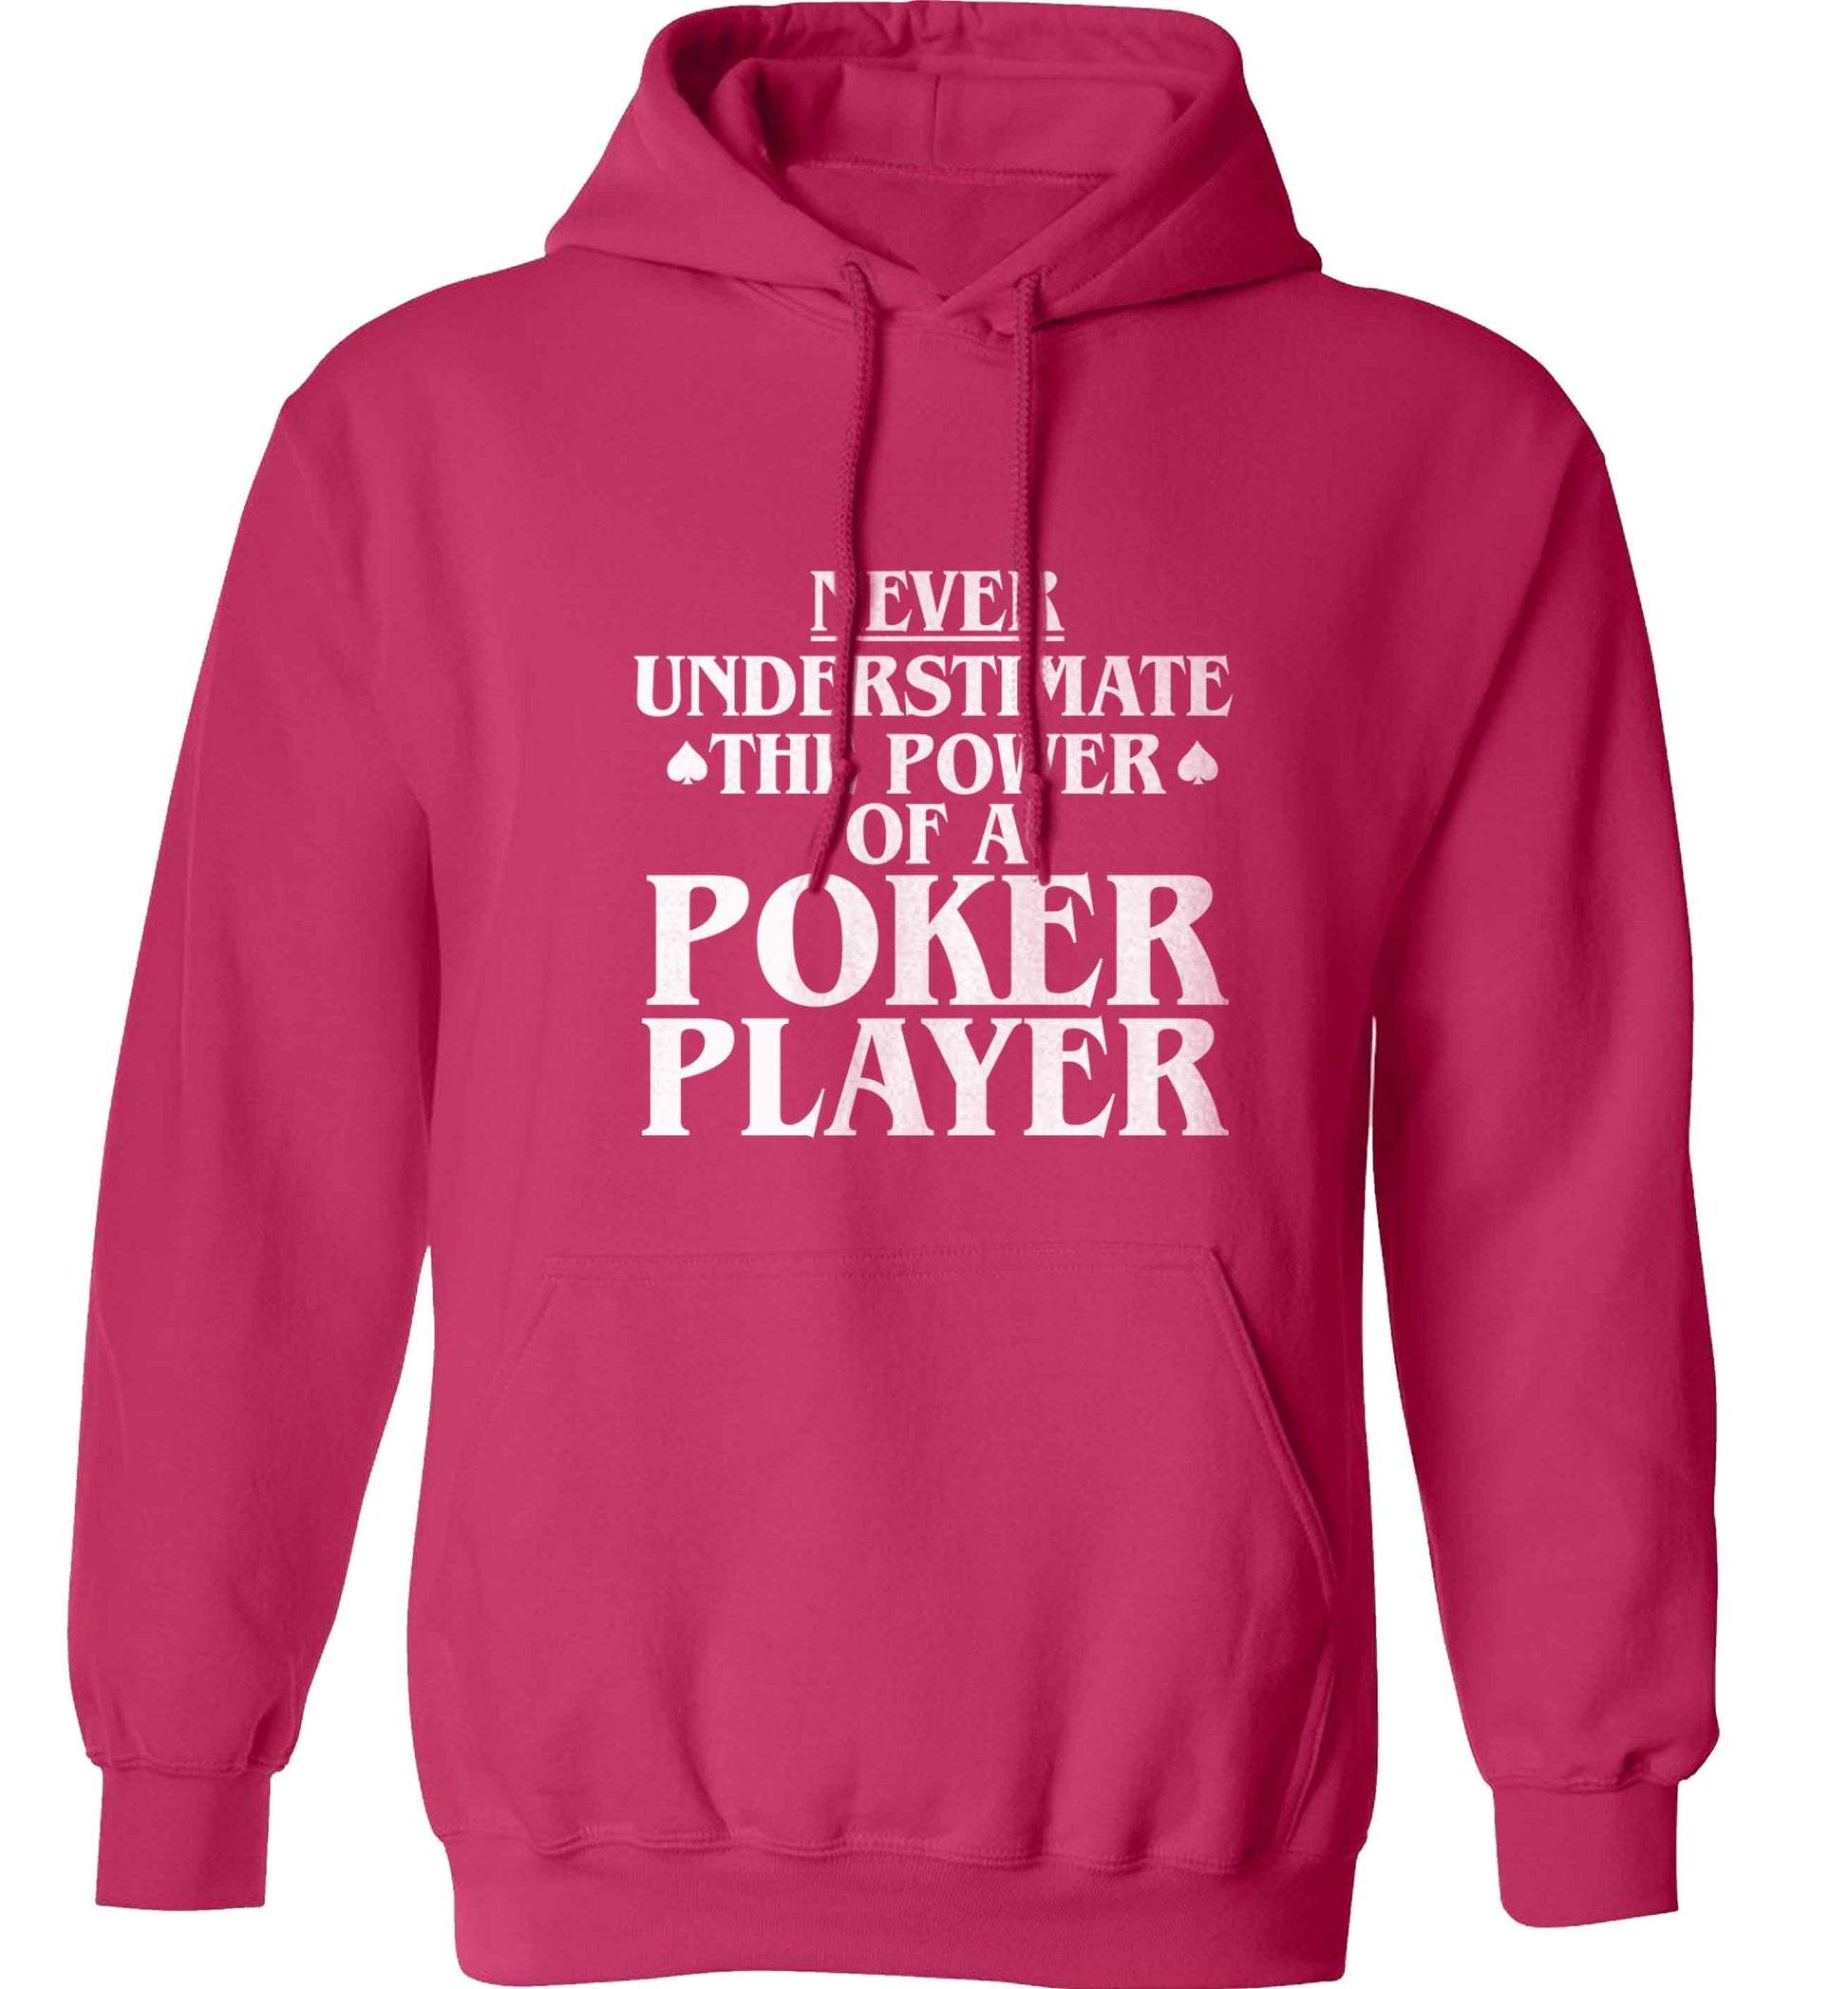 Never understimate the power of a poker player adults unisex pink hoodie 2XL